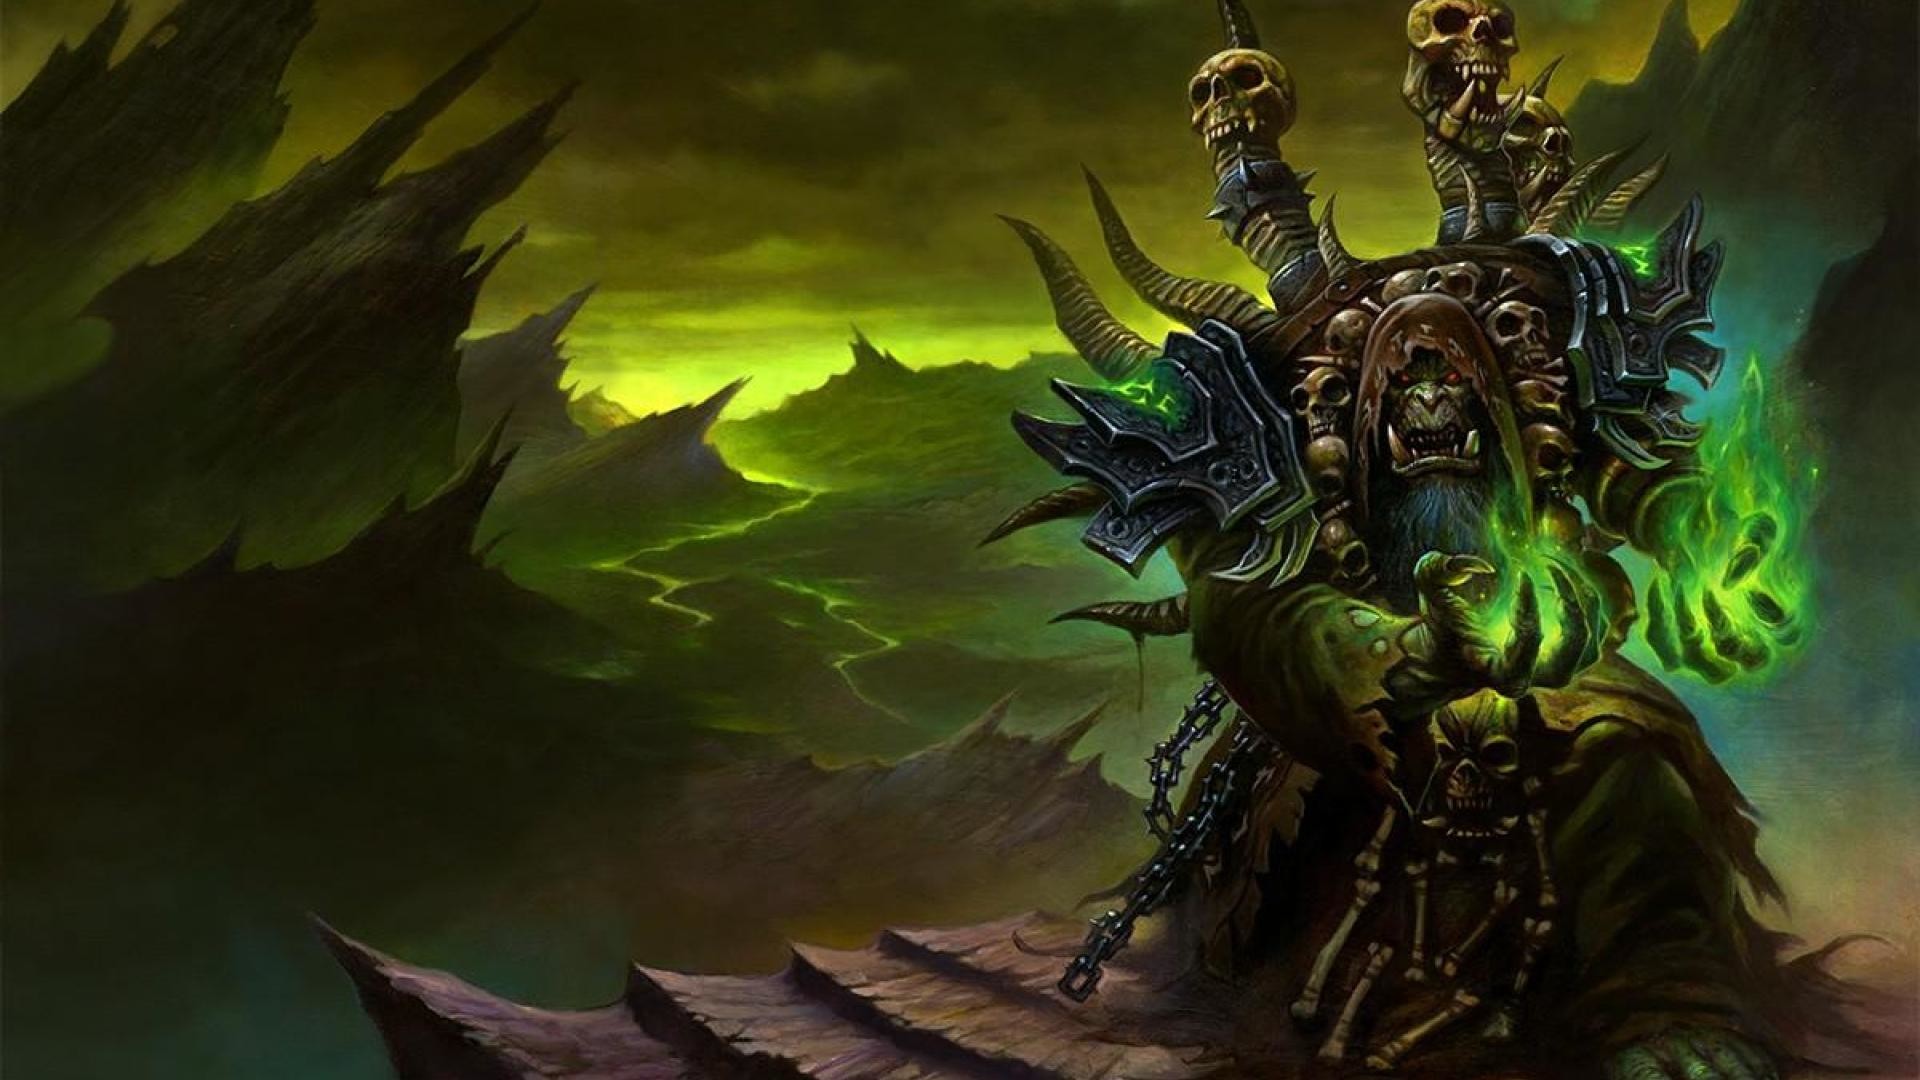 1920x1080 World Of Warcraft HD Wallpapers Backgrounds Wallpaper | HD Wallpapers |  Pinterest | Wallpaper, Hd wallpaper and Desktop backgrounds